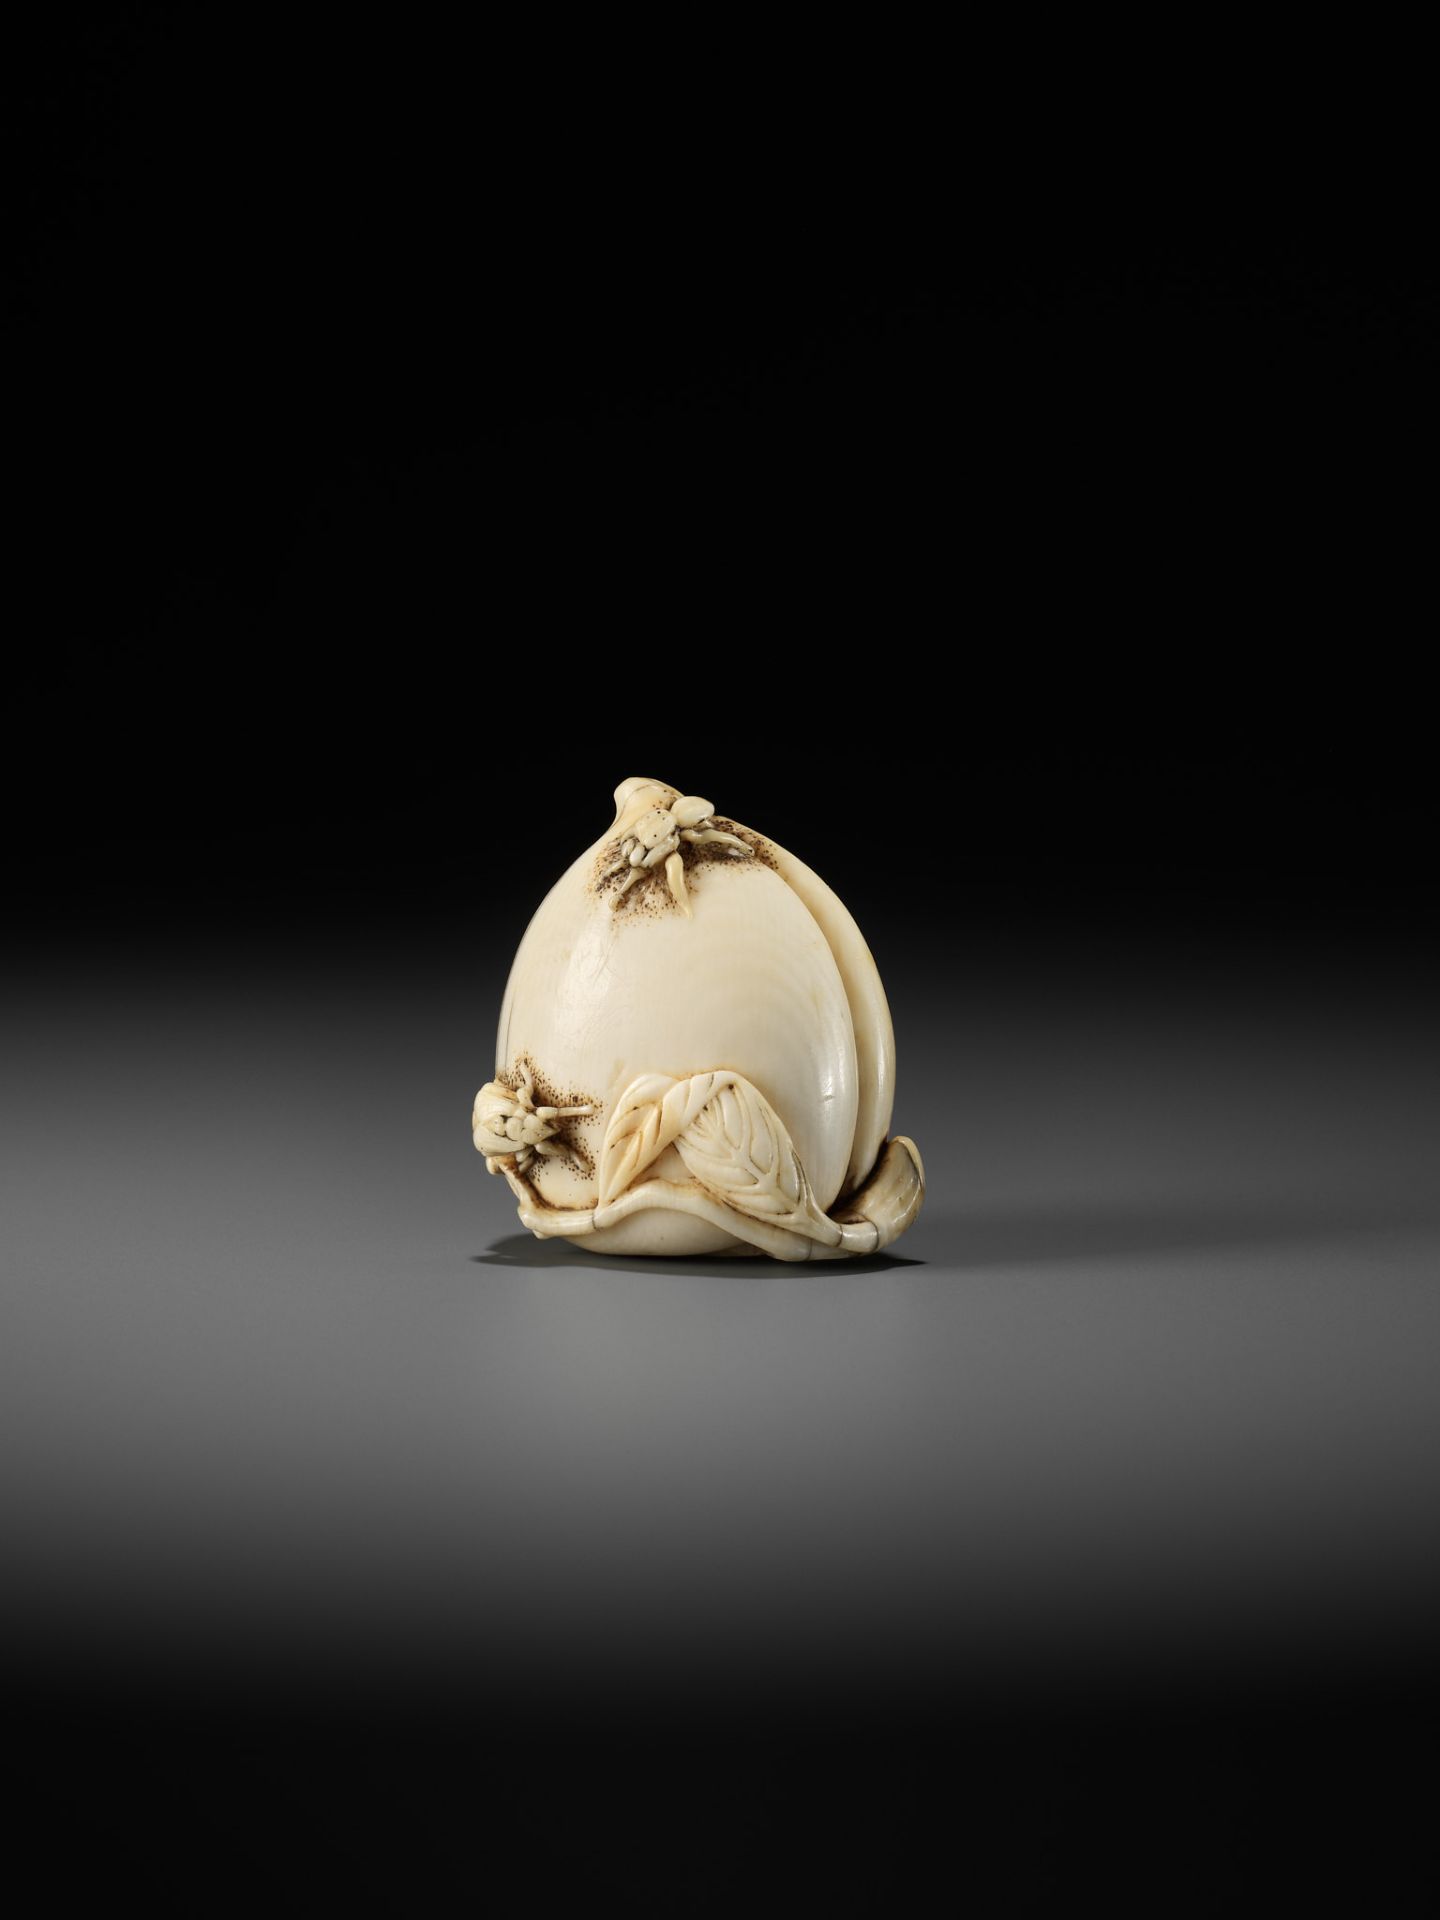 AN IVORY NETSUKE OF A PEACH WITH INSECTS - Image 8 of 10